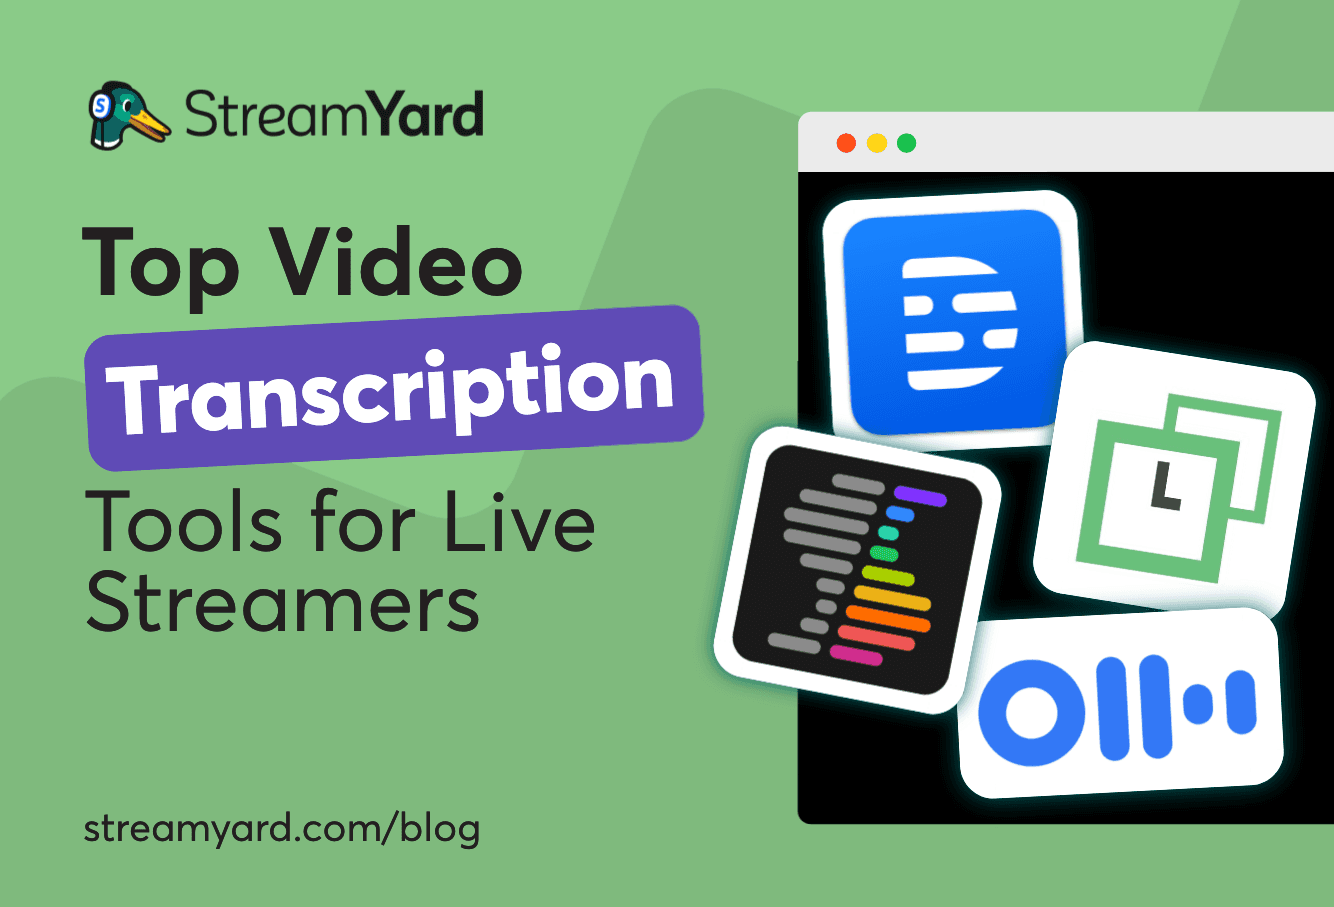 Live video transcripts can help you expand your video reach even when it's over. Find the top video transcription tools to get started.